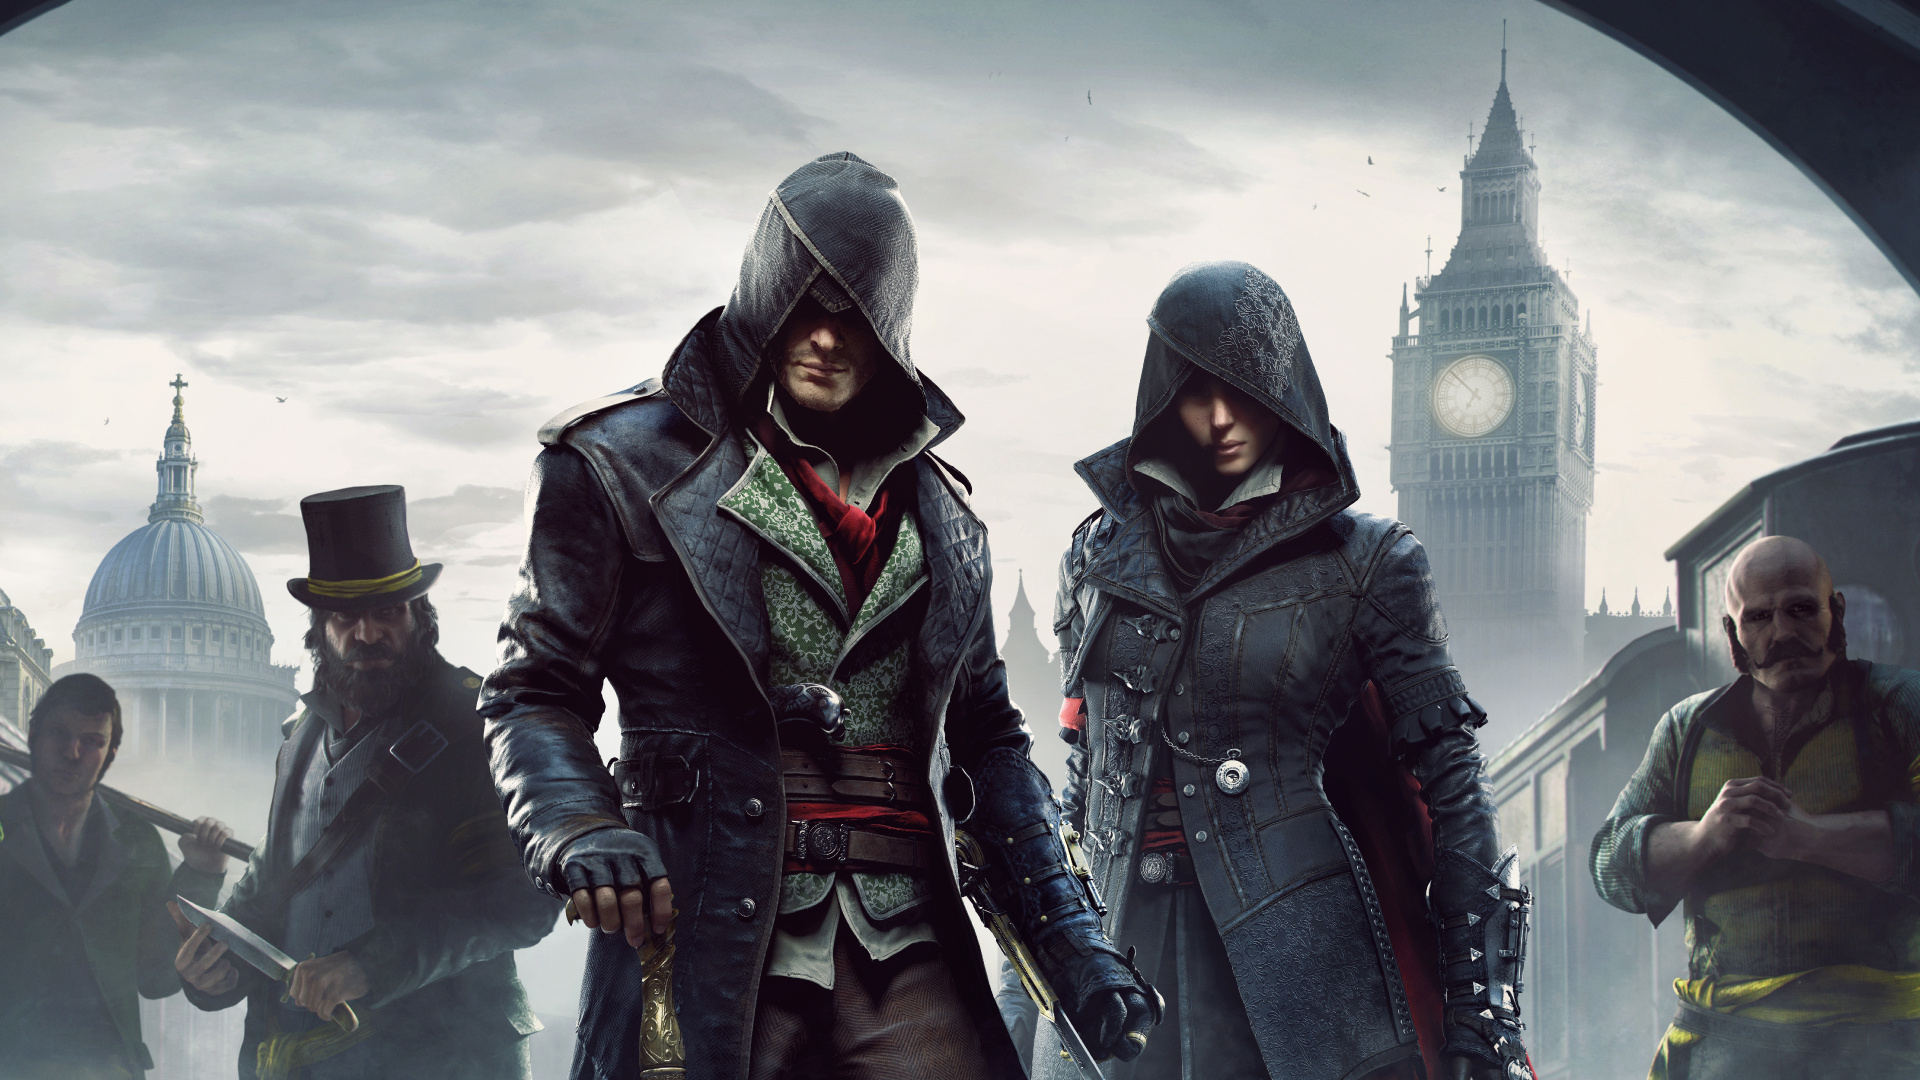 Assassins Creed Syndicate, Ubisoft, pc Game, Film, Assassins Creed Unity. Wallpaper in 1920x1080 Resolution